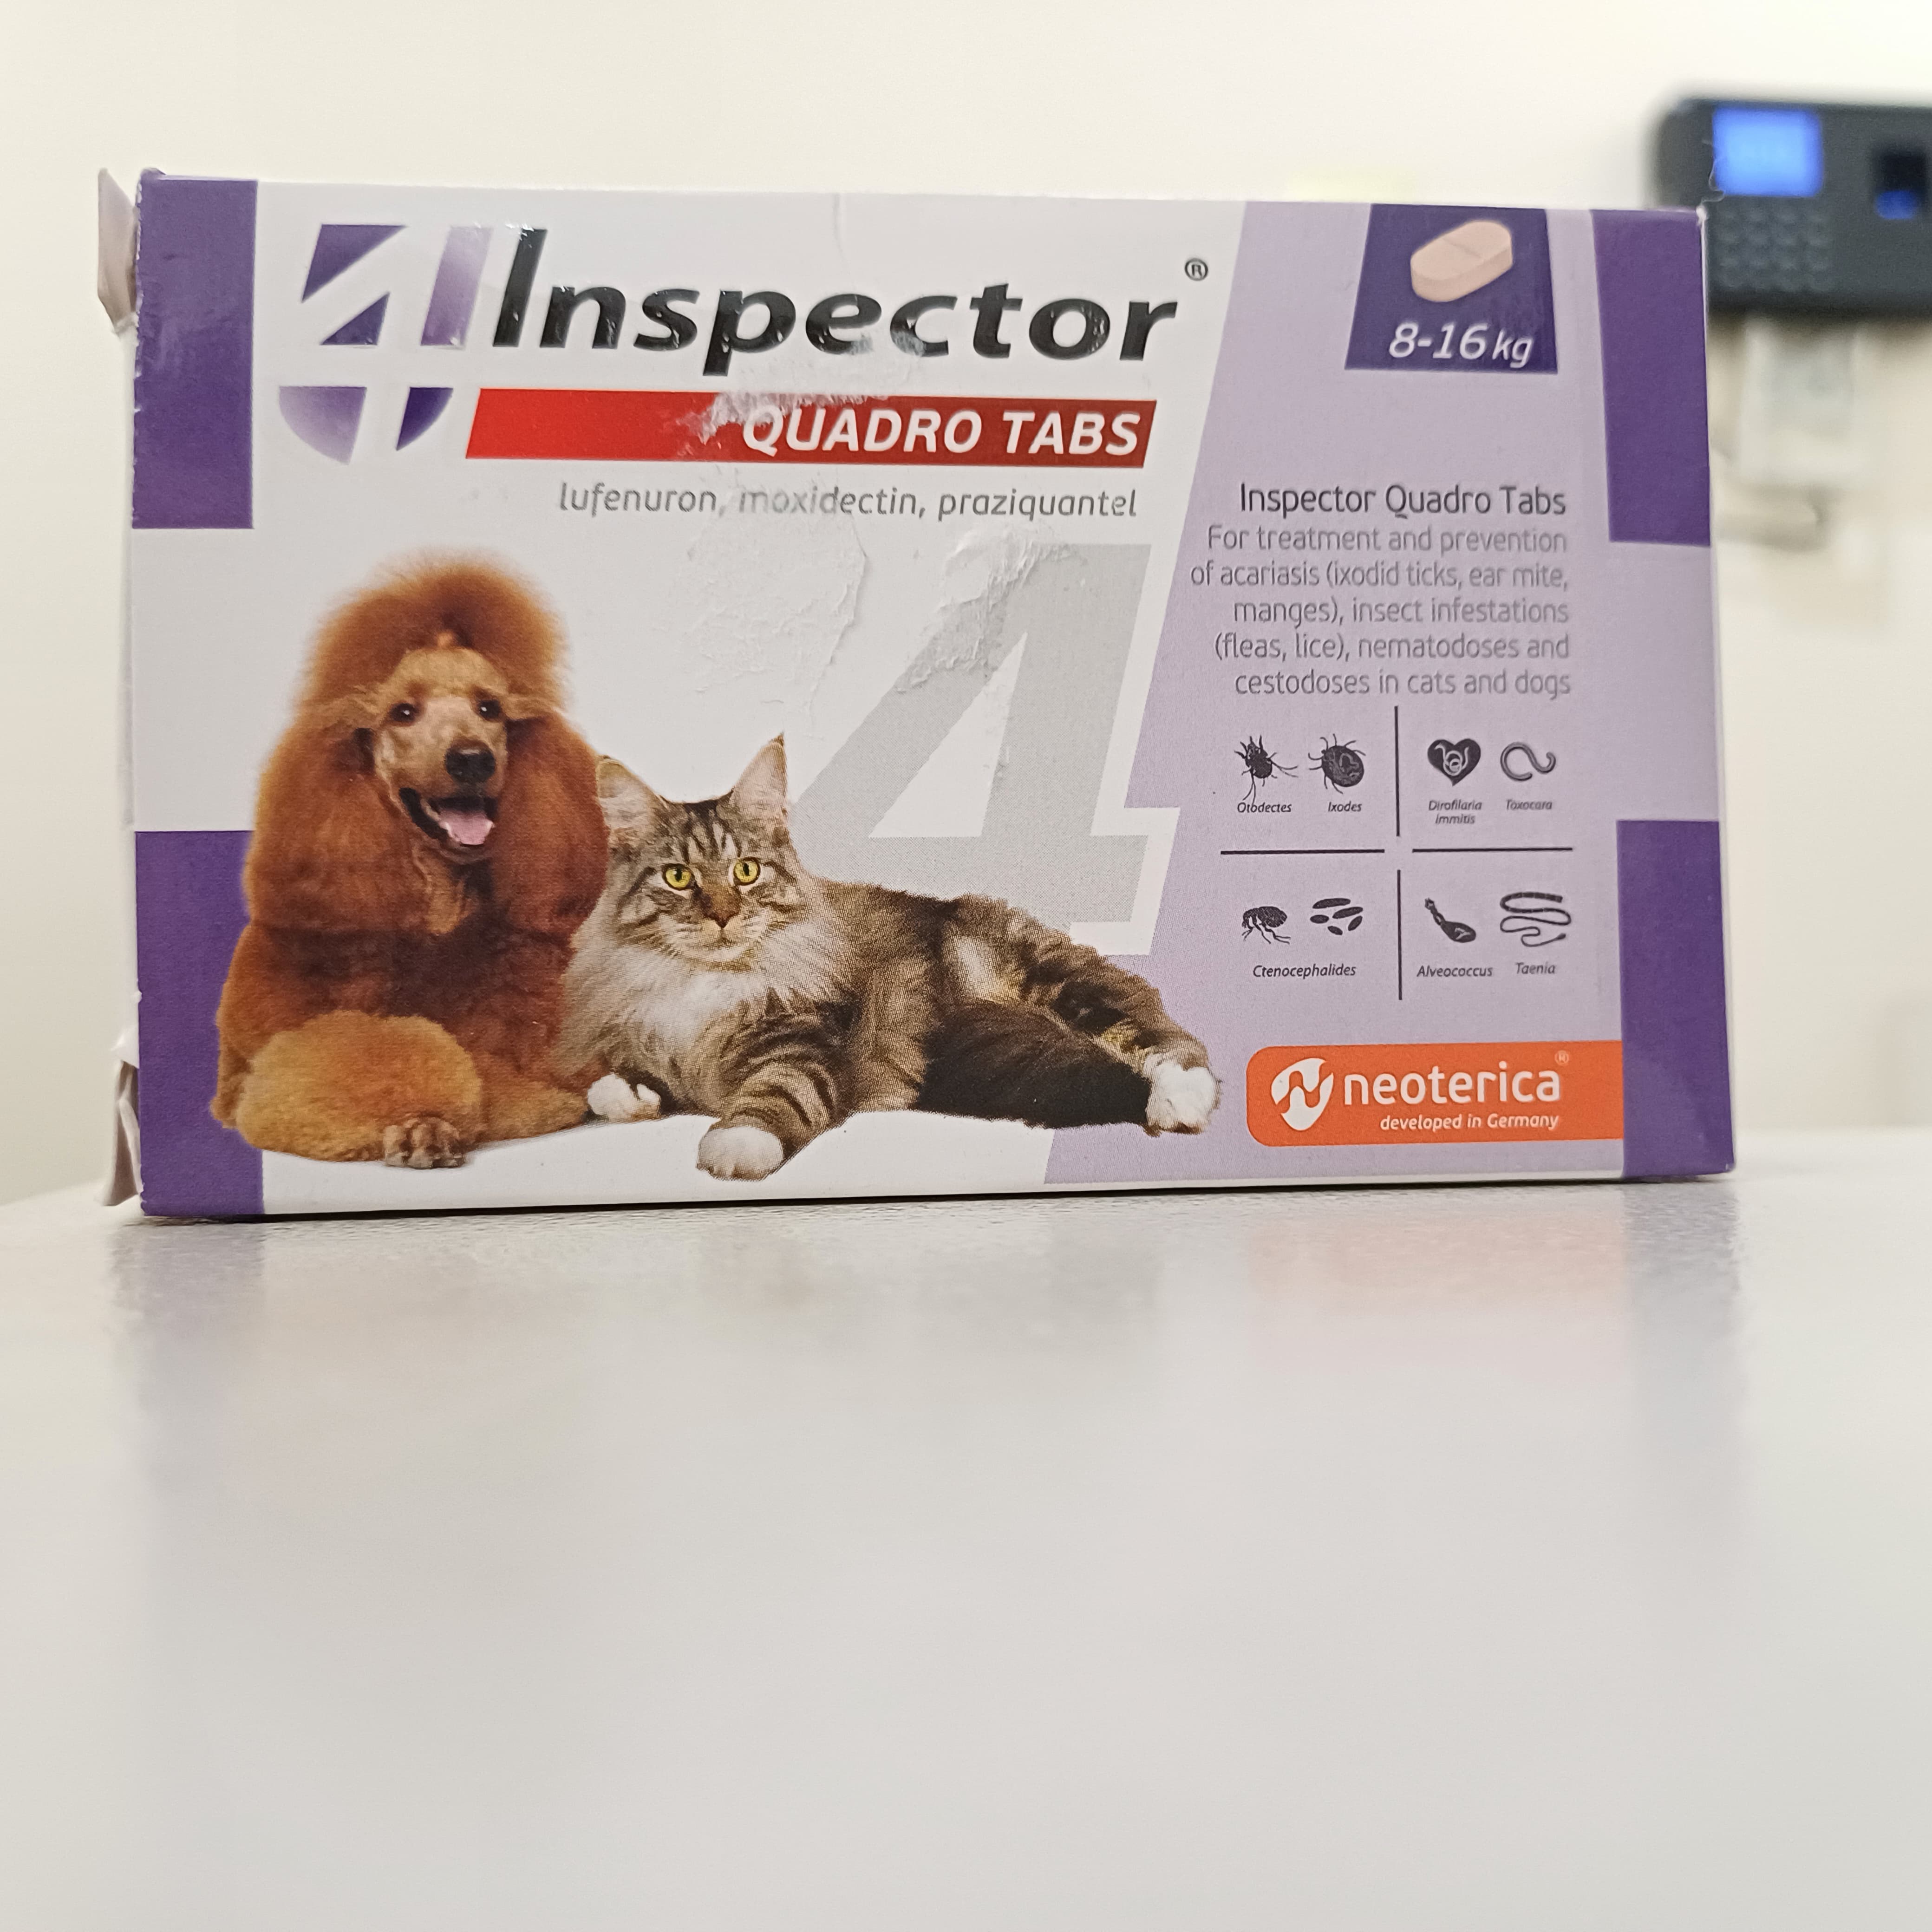 Inspector Quadro Tabs For Cats & Dogs 8 - 16 Kg 1 Box